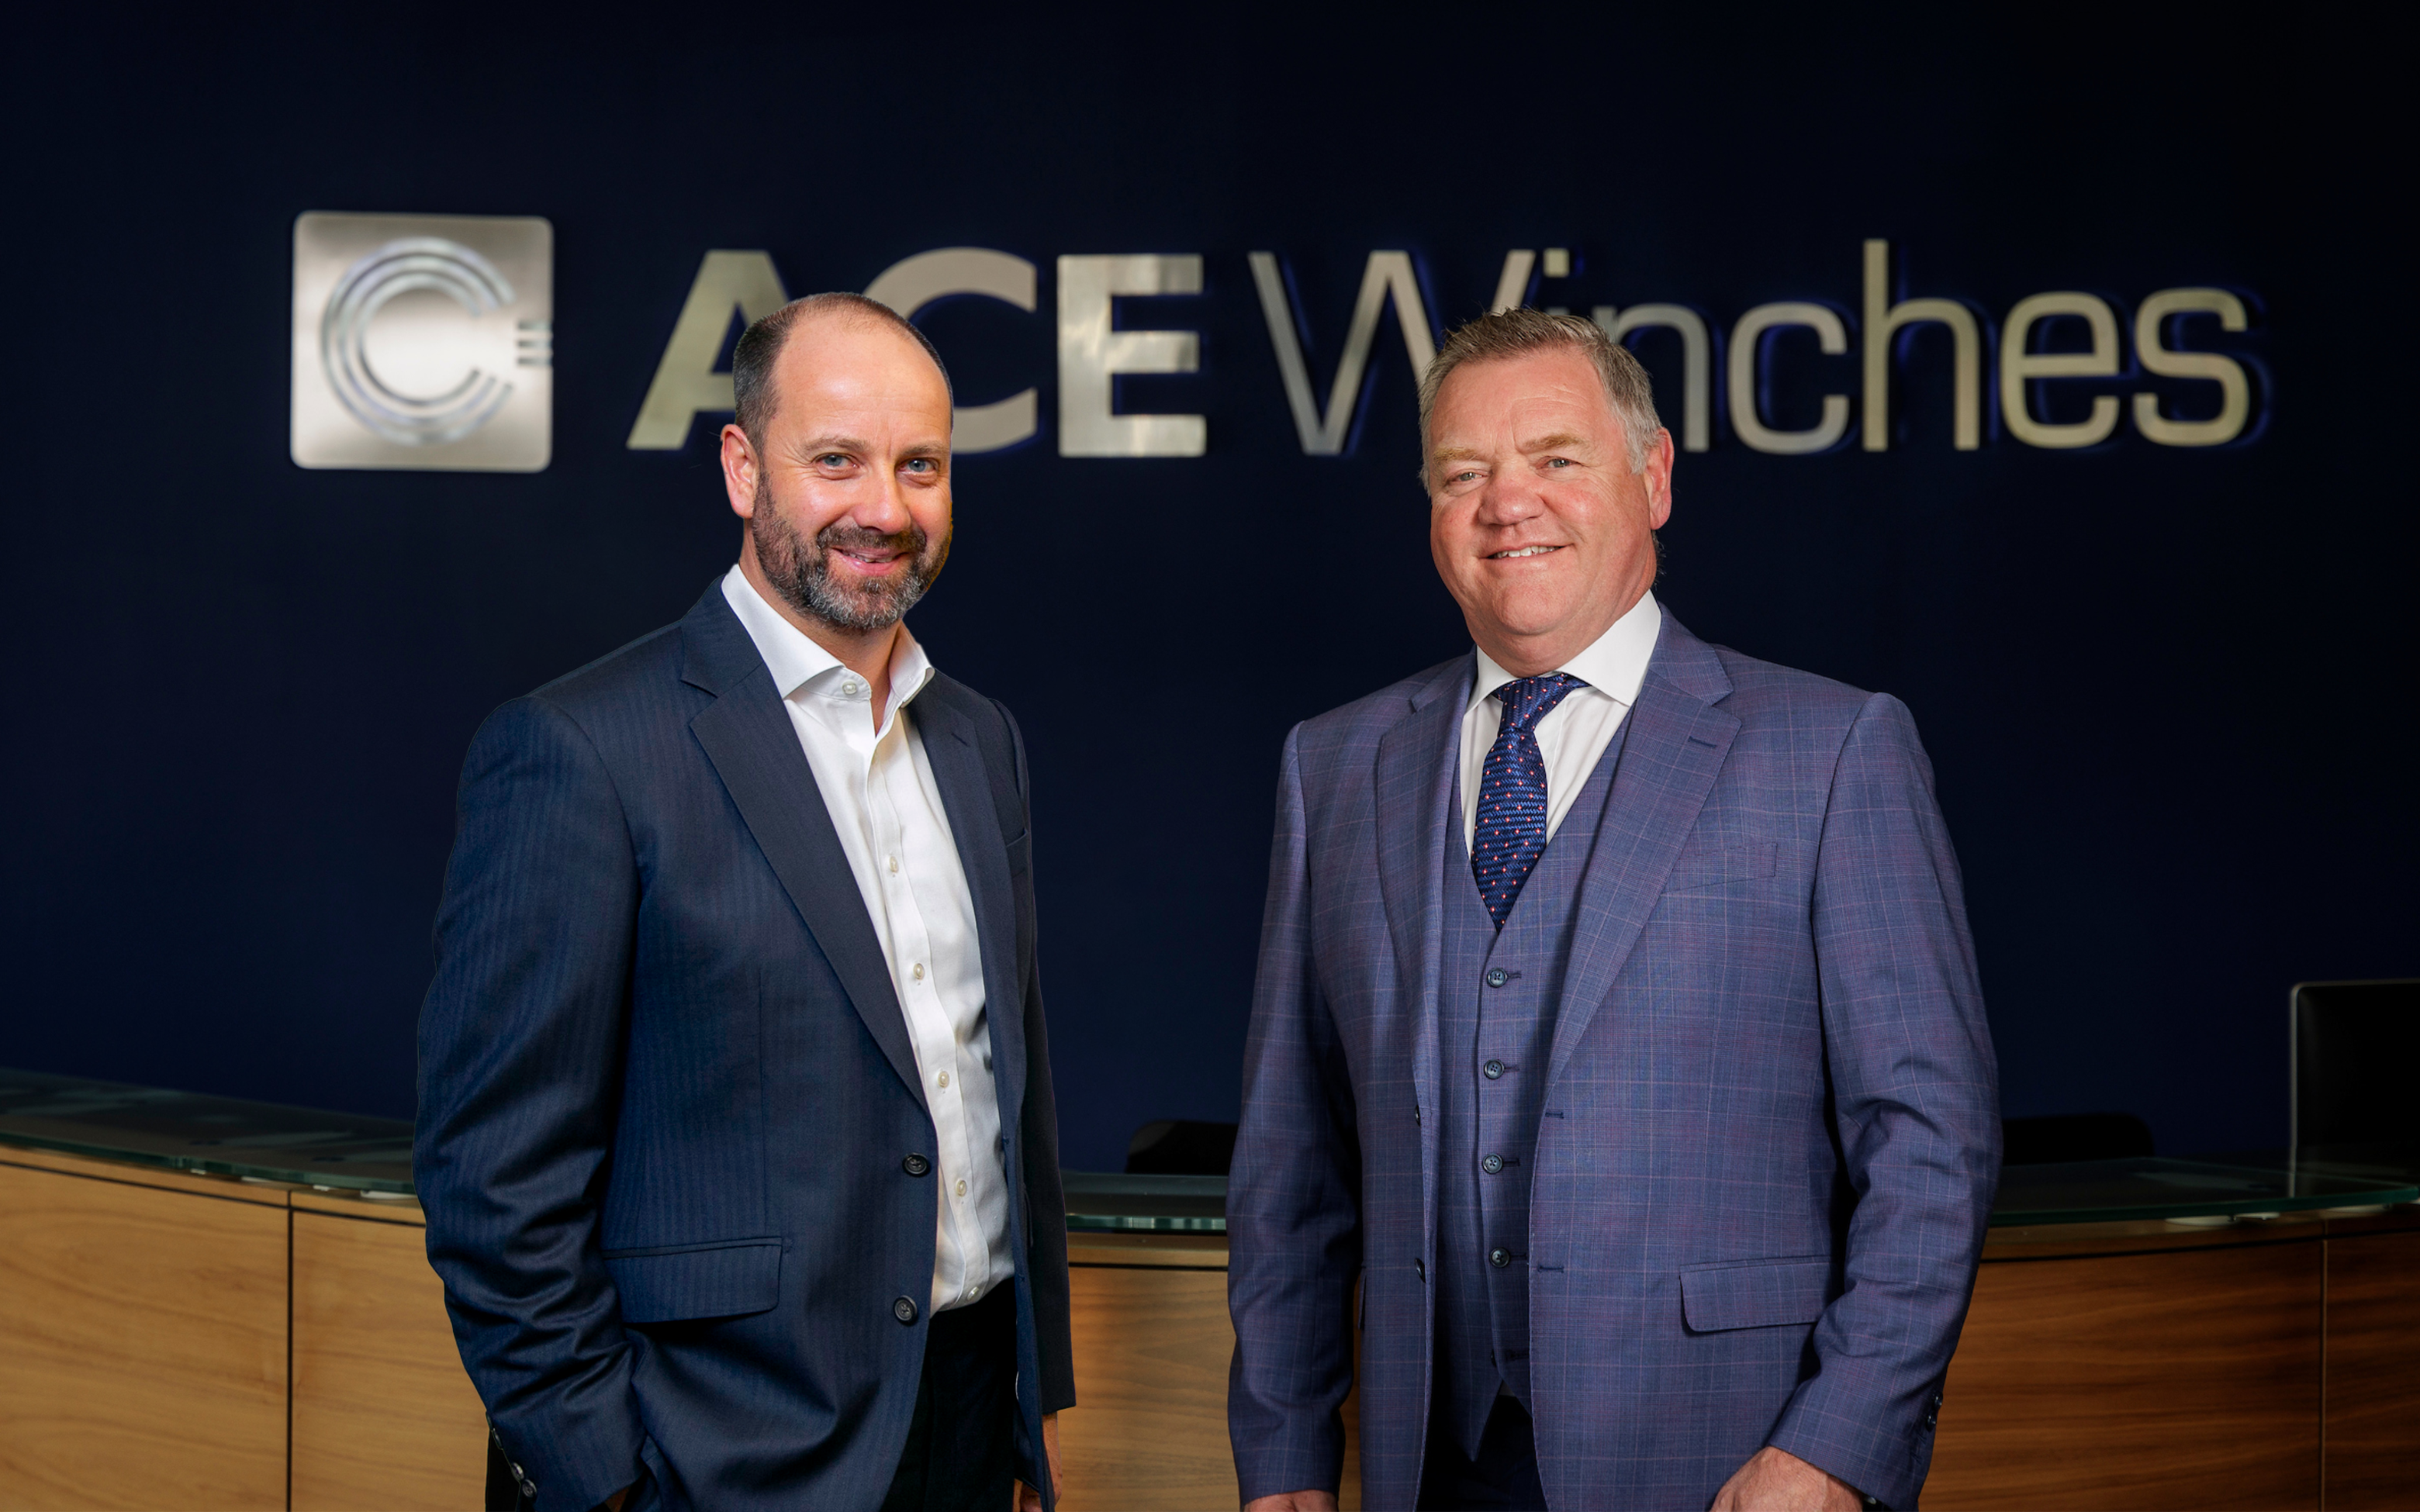 MEMBER NEWS: Ashtead Technology acquires ACE Winches